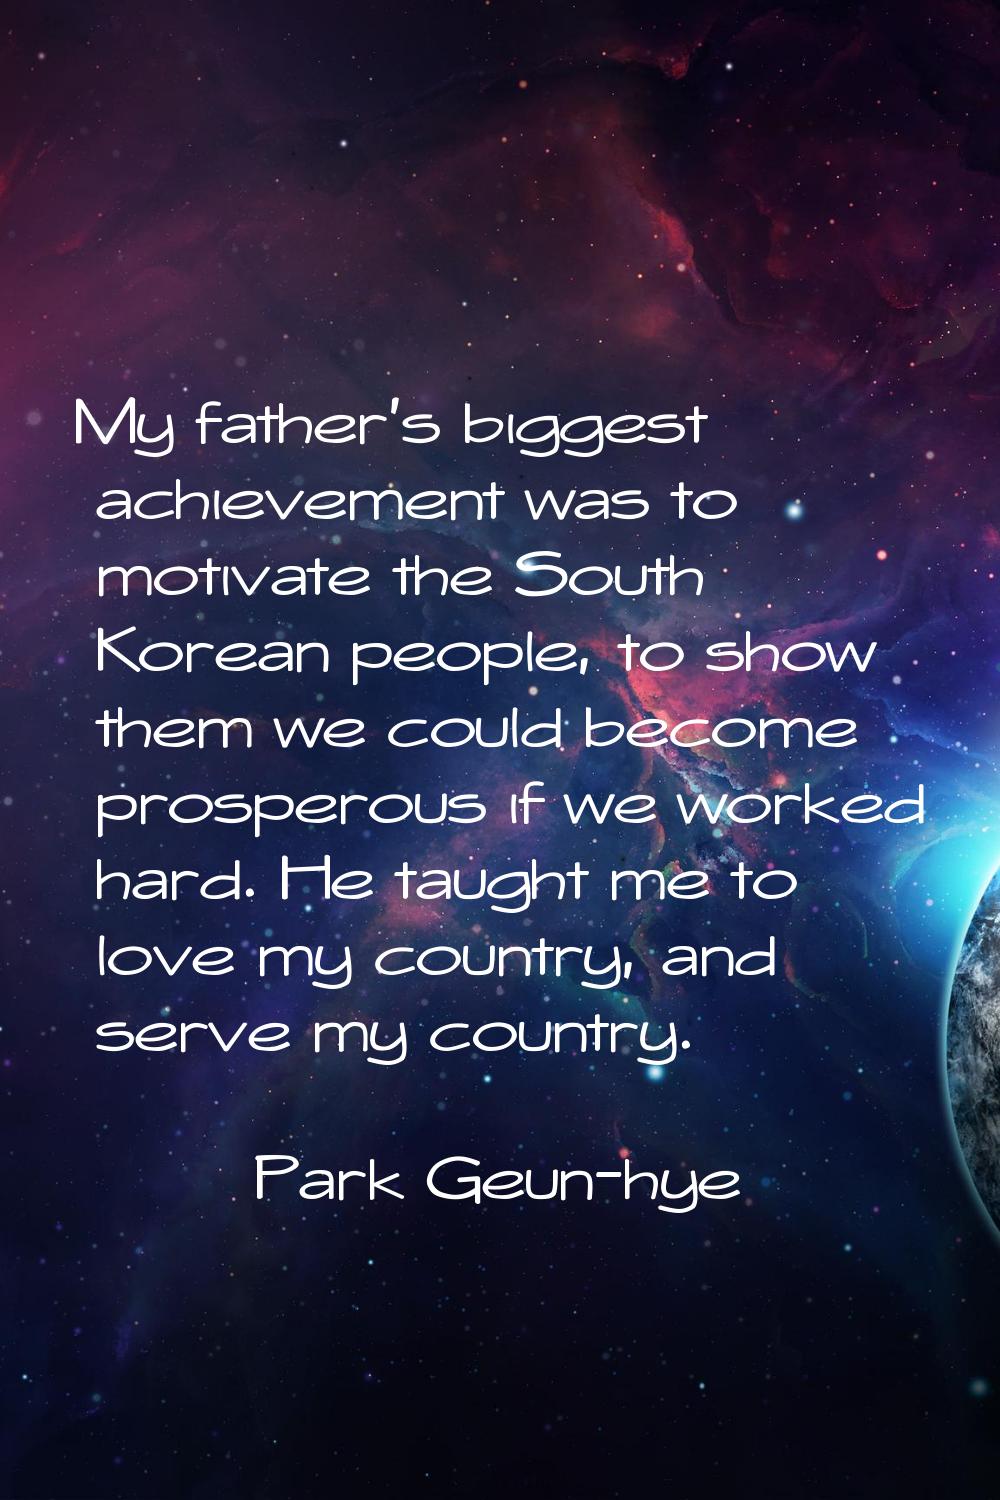 My father's biggest achievement was to motivate the South Korean people, to show them we could beco